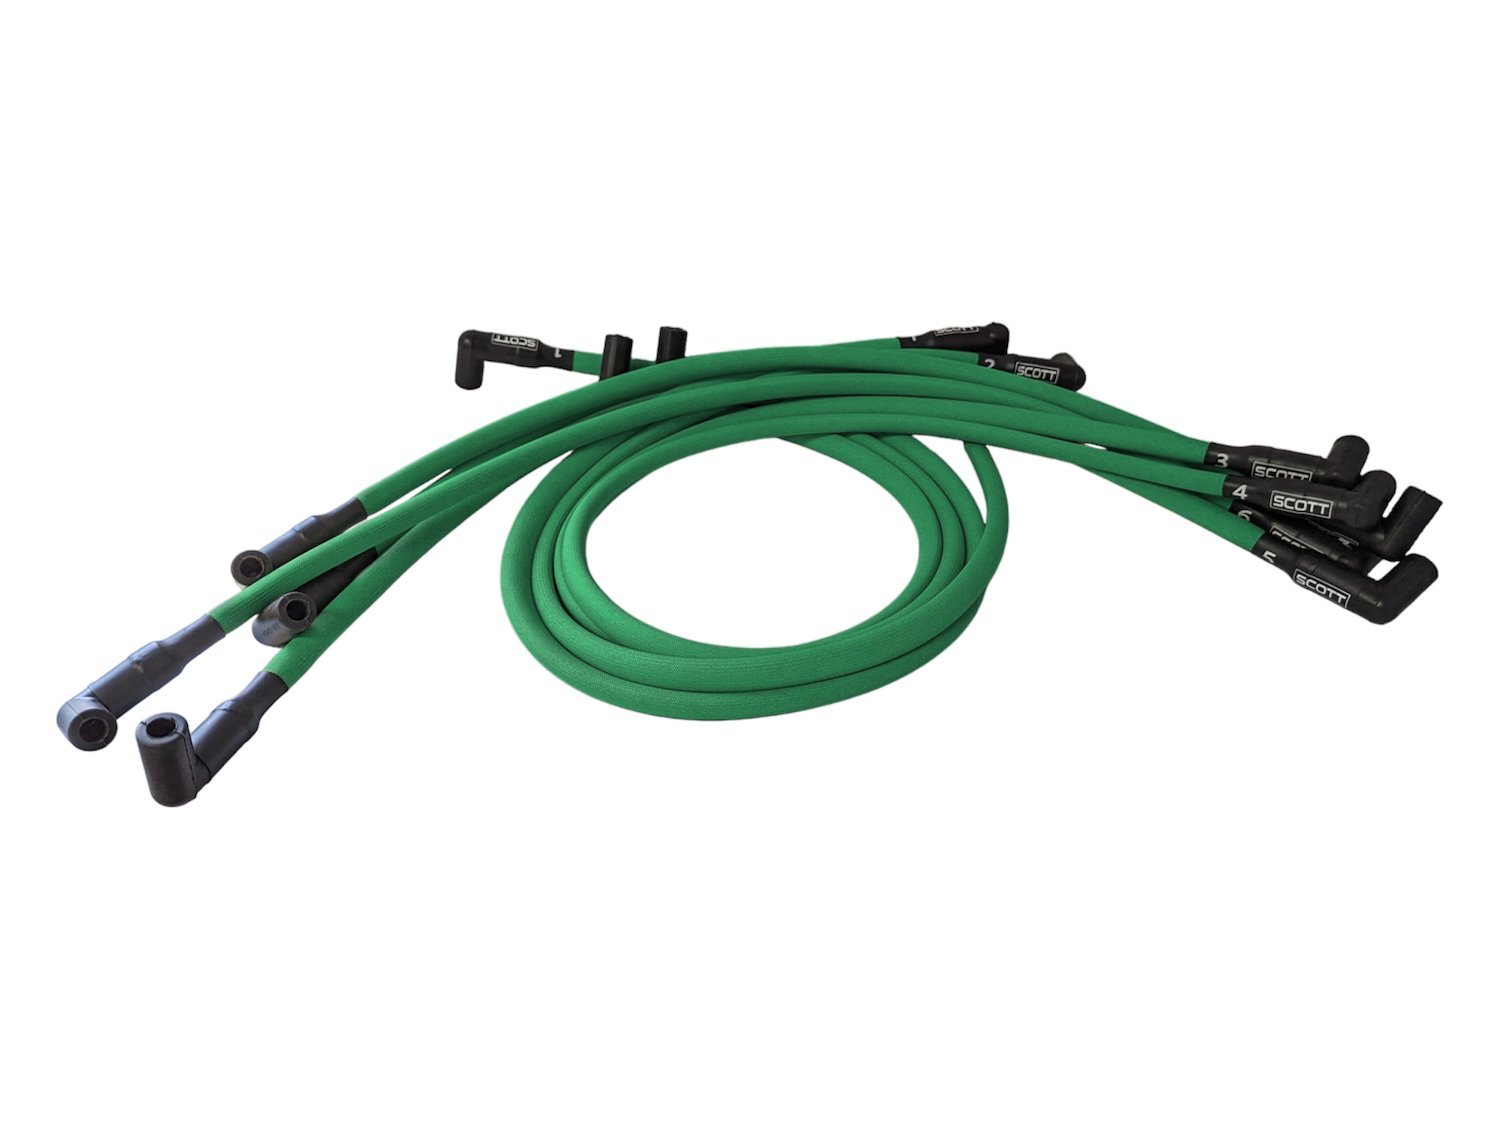 SPW-PS-435-4 High-Performance Fiberglass-Oversleeved Spark Plug Wire Set for Small Block Chevy, Around Front [Green]